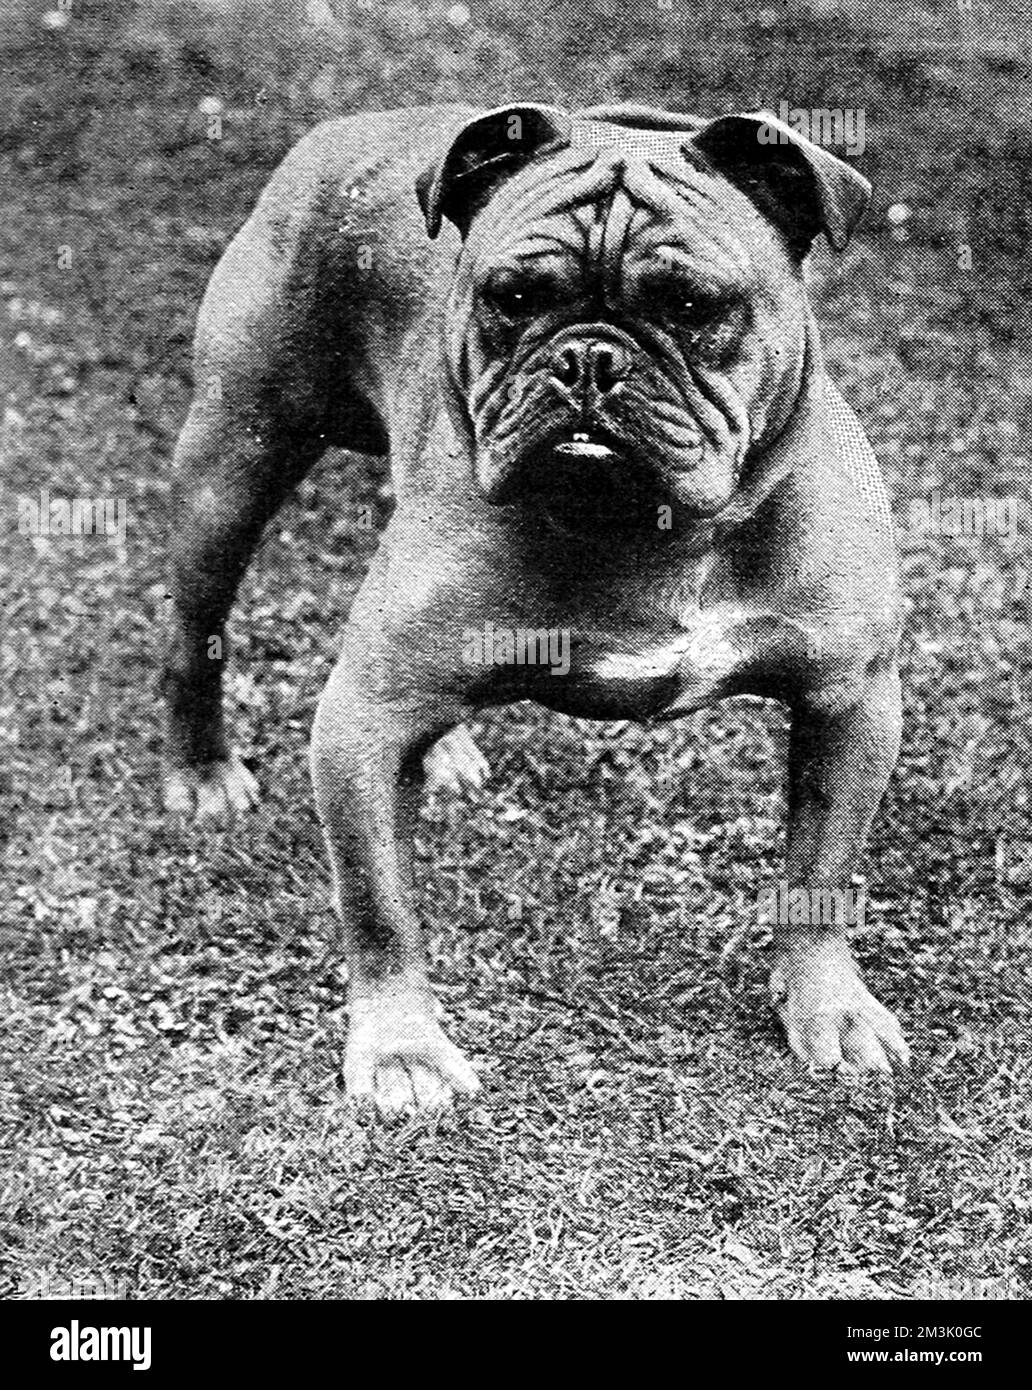 Mr. Sam Woodiwiss's Champion Bulldog 'Baron Sedgemere', pictured when a two and a half year old. 'Baron Sedgemere' was the offspring of 'Stockwell' and 'Champion Blackberry' and its siblings included 'Barney Barnato' and 'Baroness Sedgemere'. Stock Photo